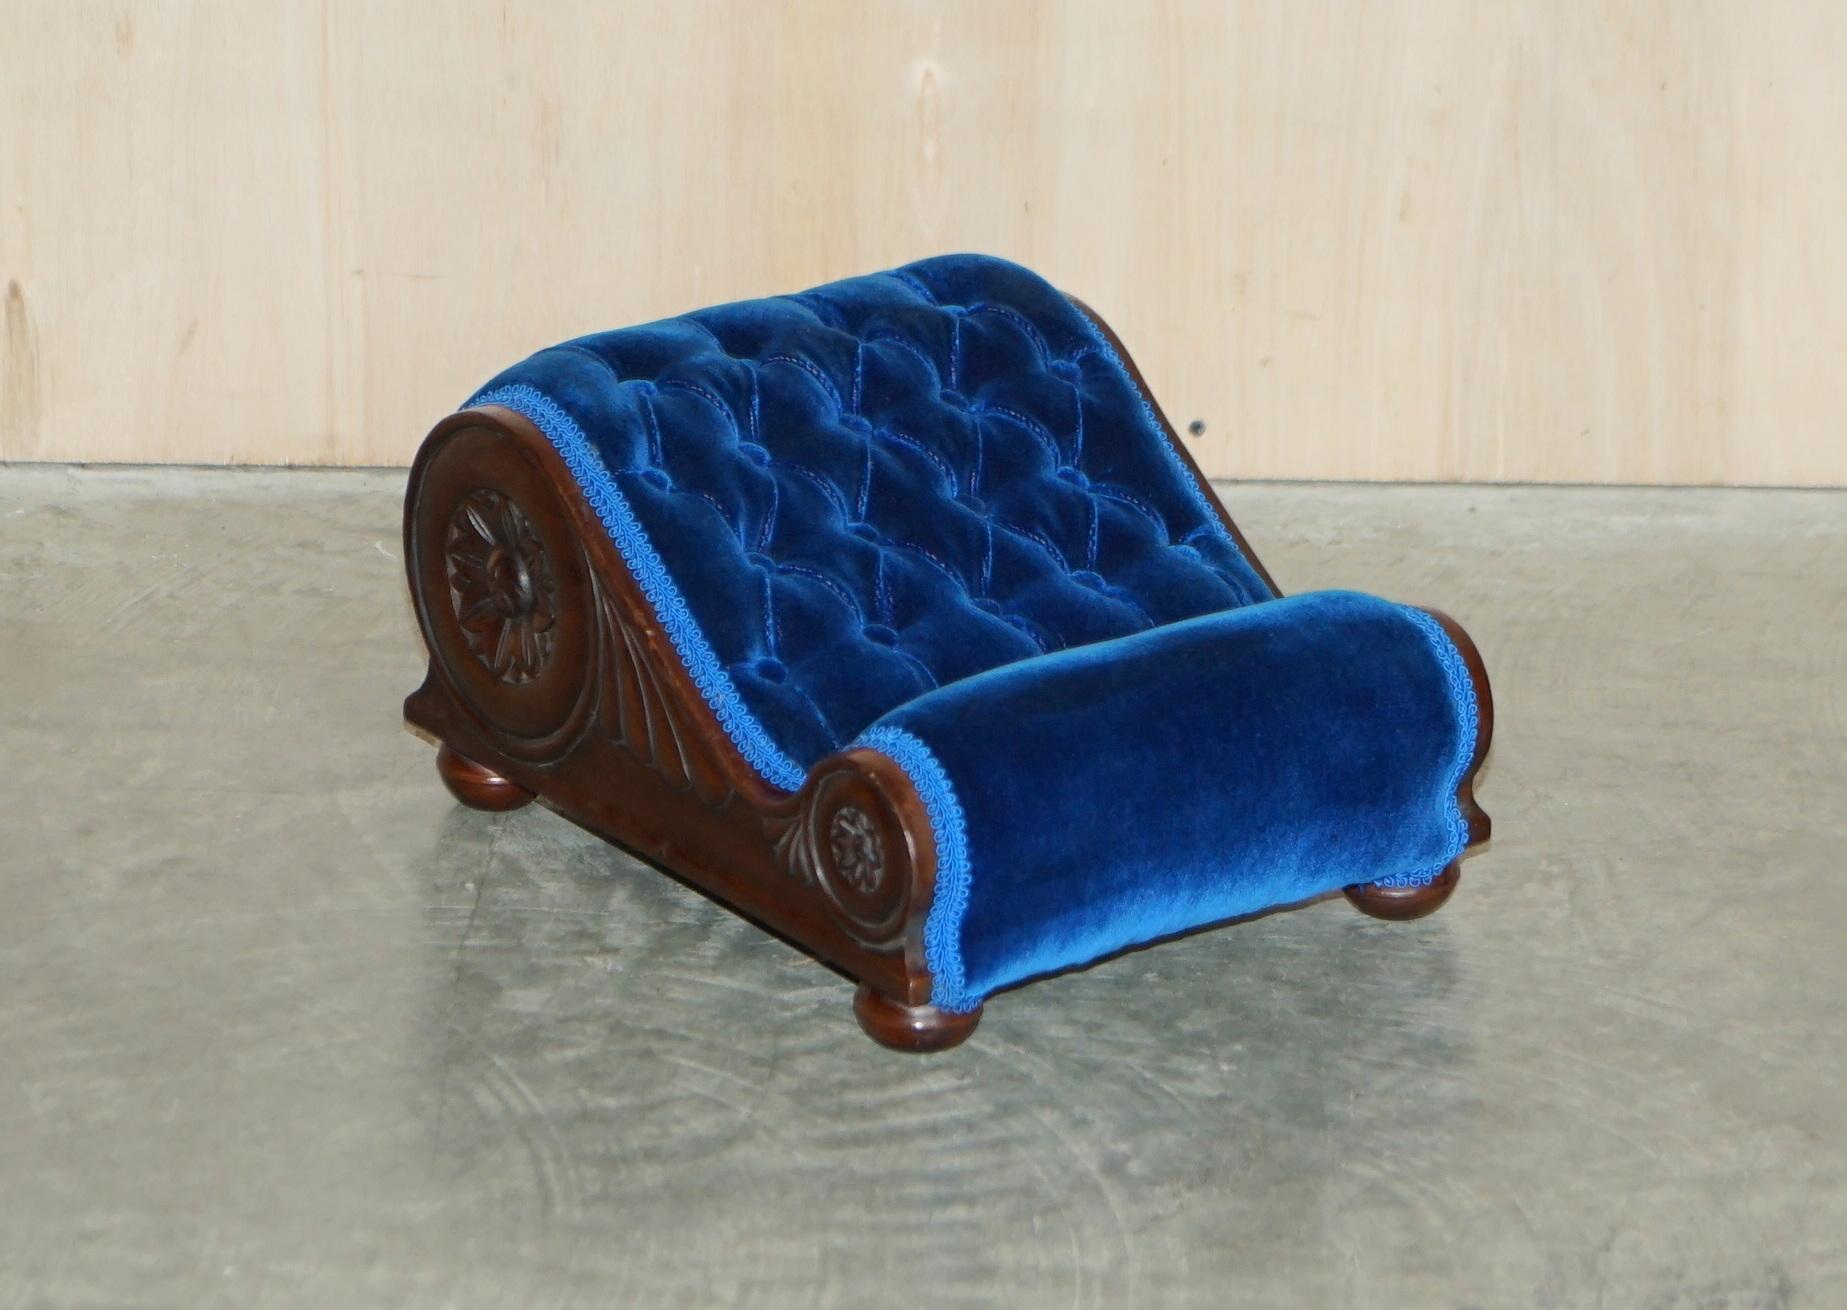 Royal House Antiques

Royal House Antiques is delighted to offer for sale this stunning pair of antique late Victorian, Regency blue, Chesterfield tufted footstools with carved frames

A very good looking, well made and decorative pair of